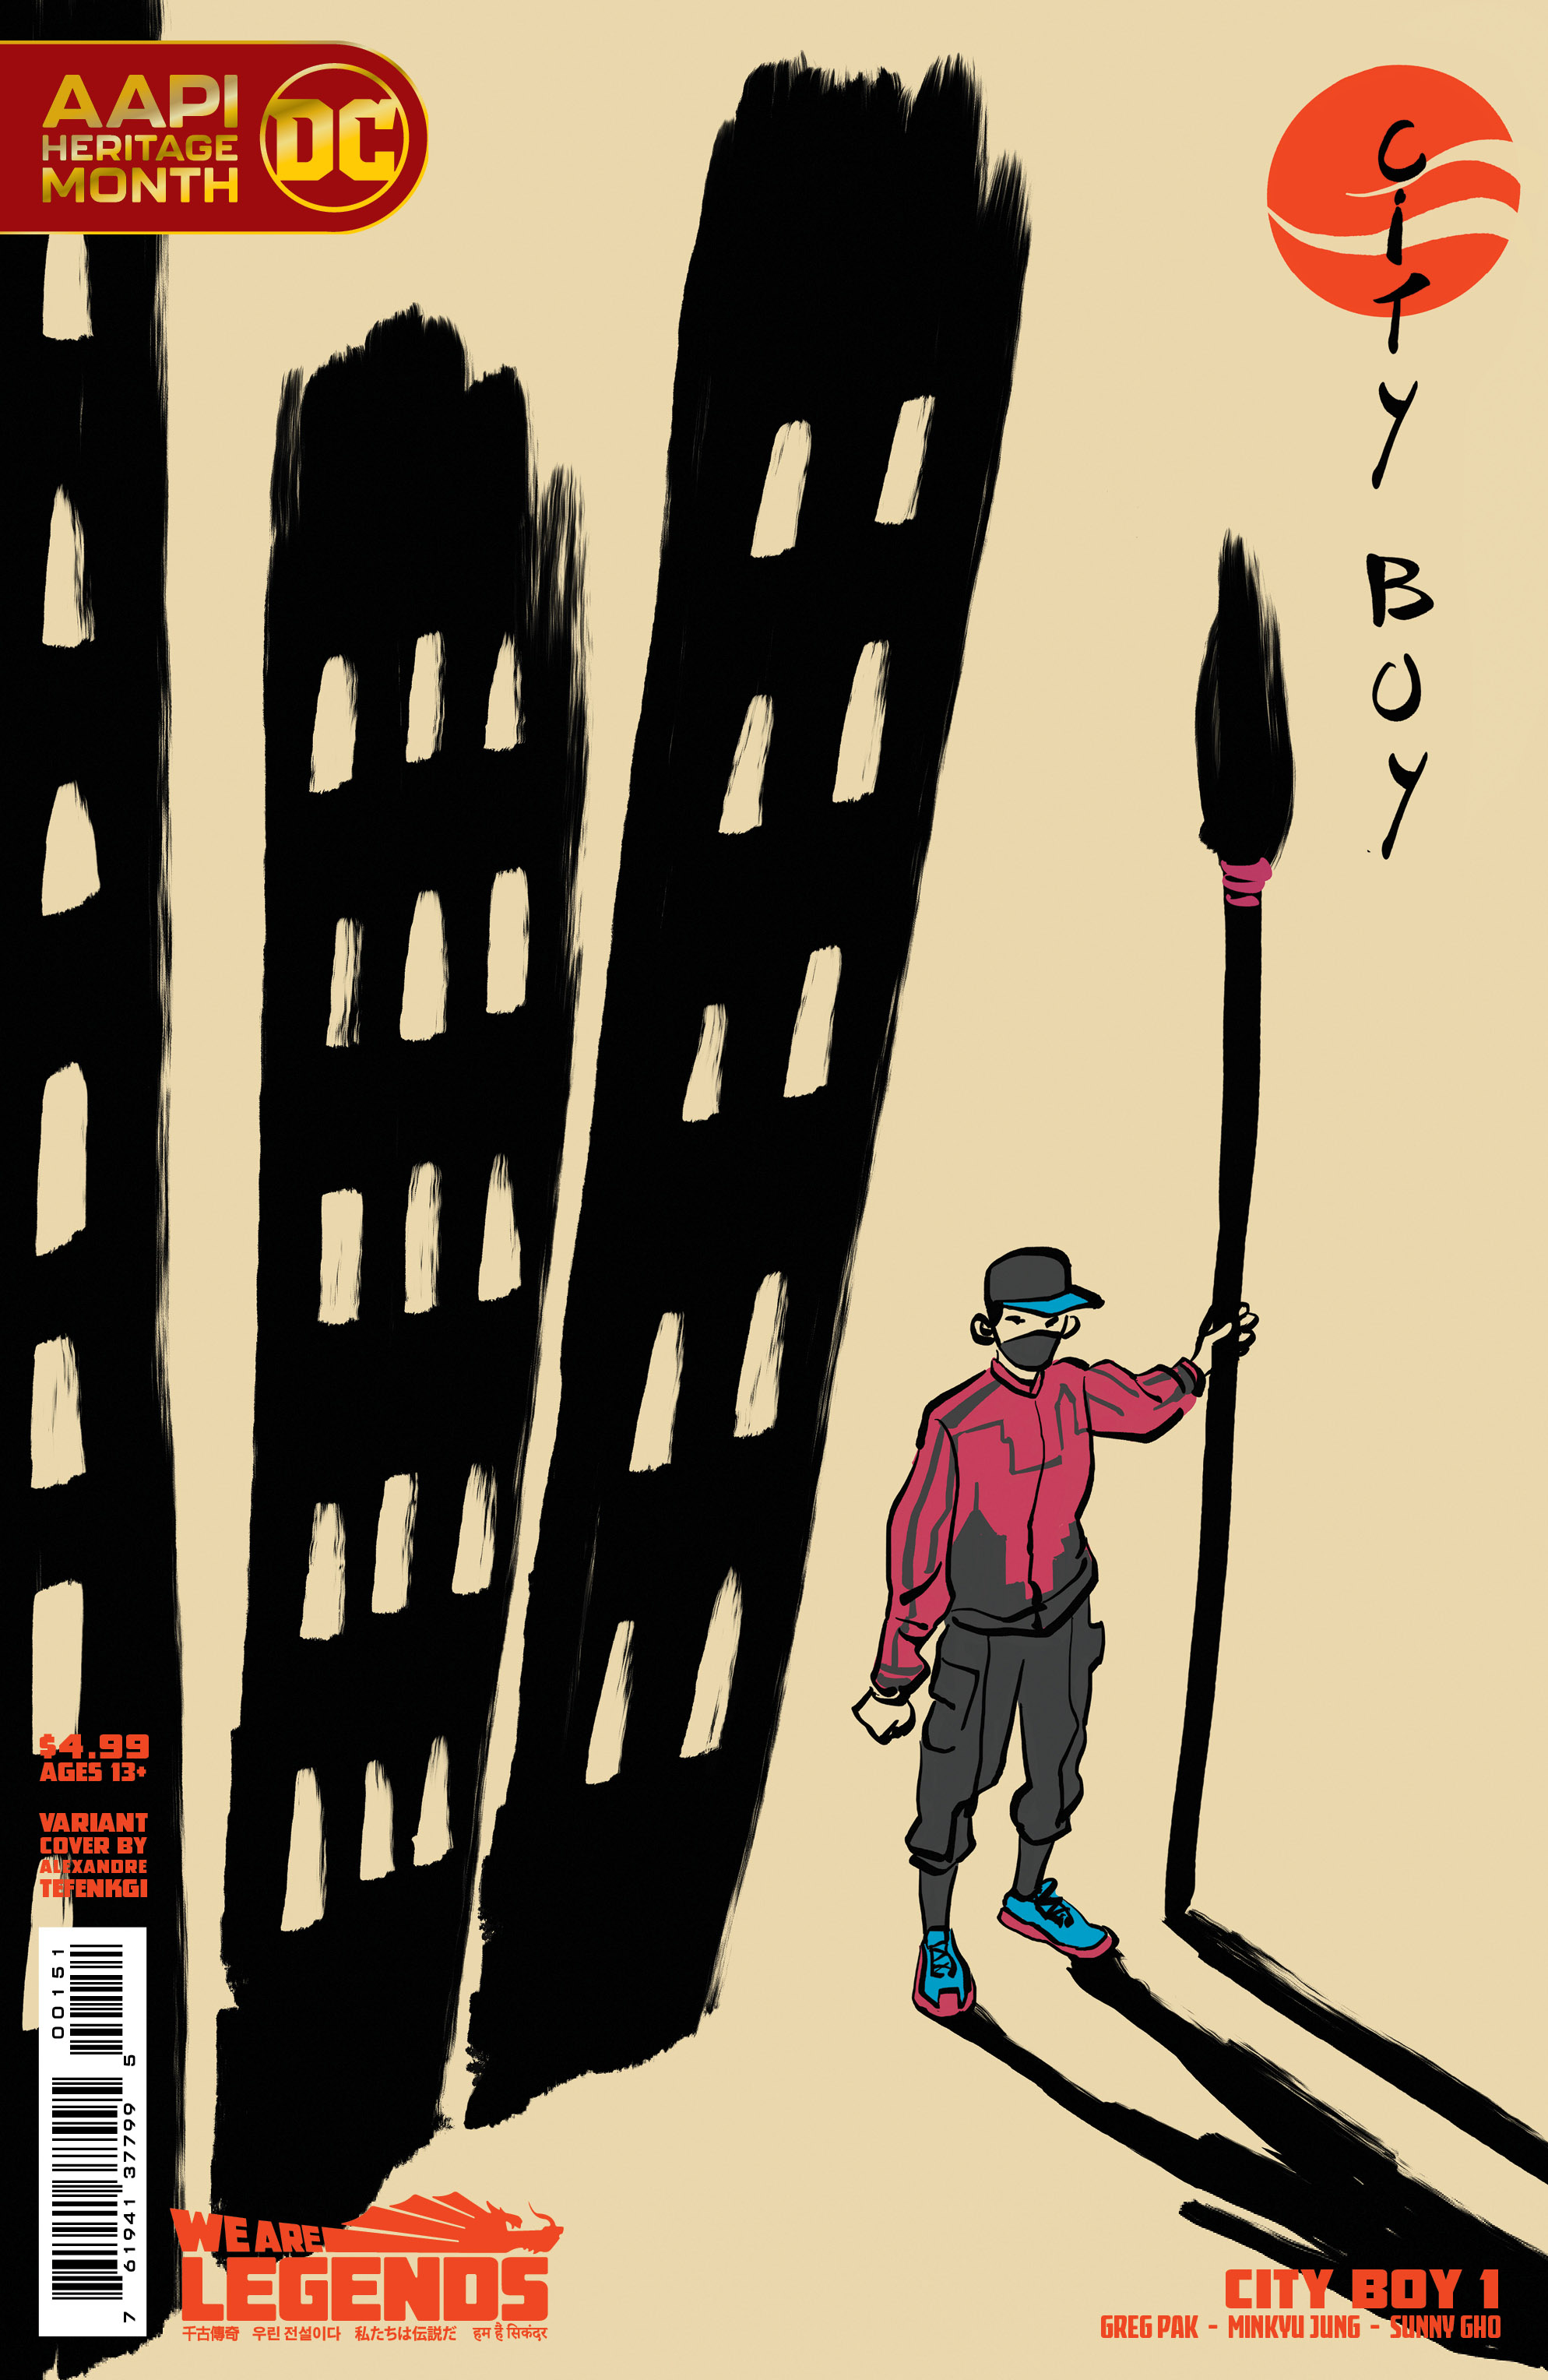 City Boy #1 Cover C Alexandre Tefenkgi Aapi Heritage Month Card Stock Variant (Of 6)